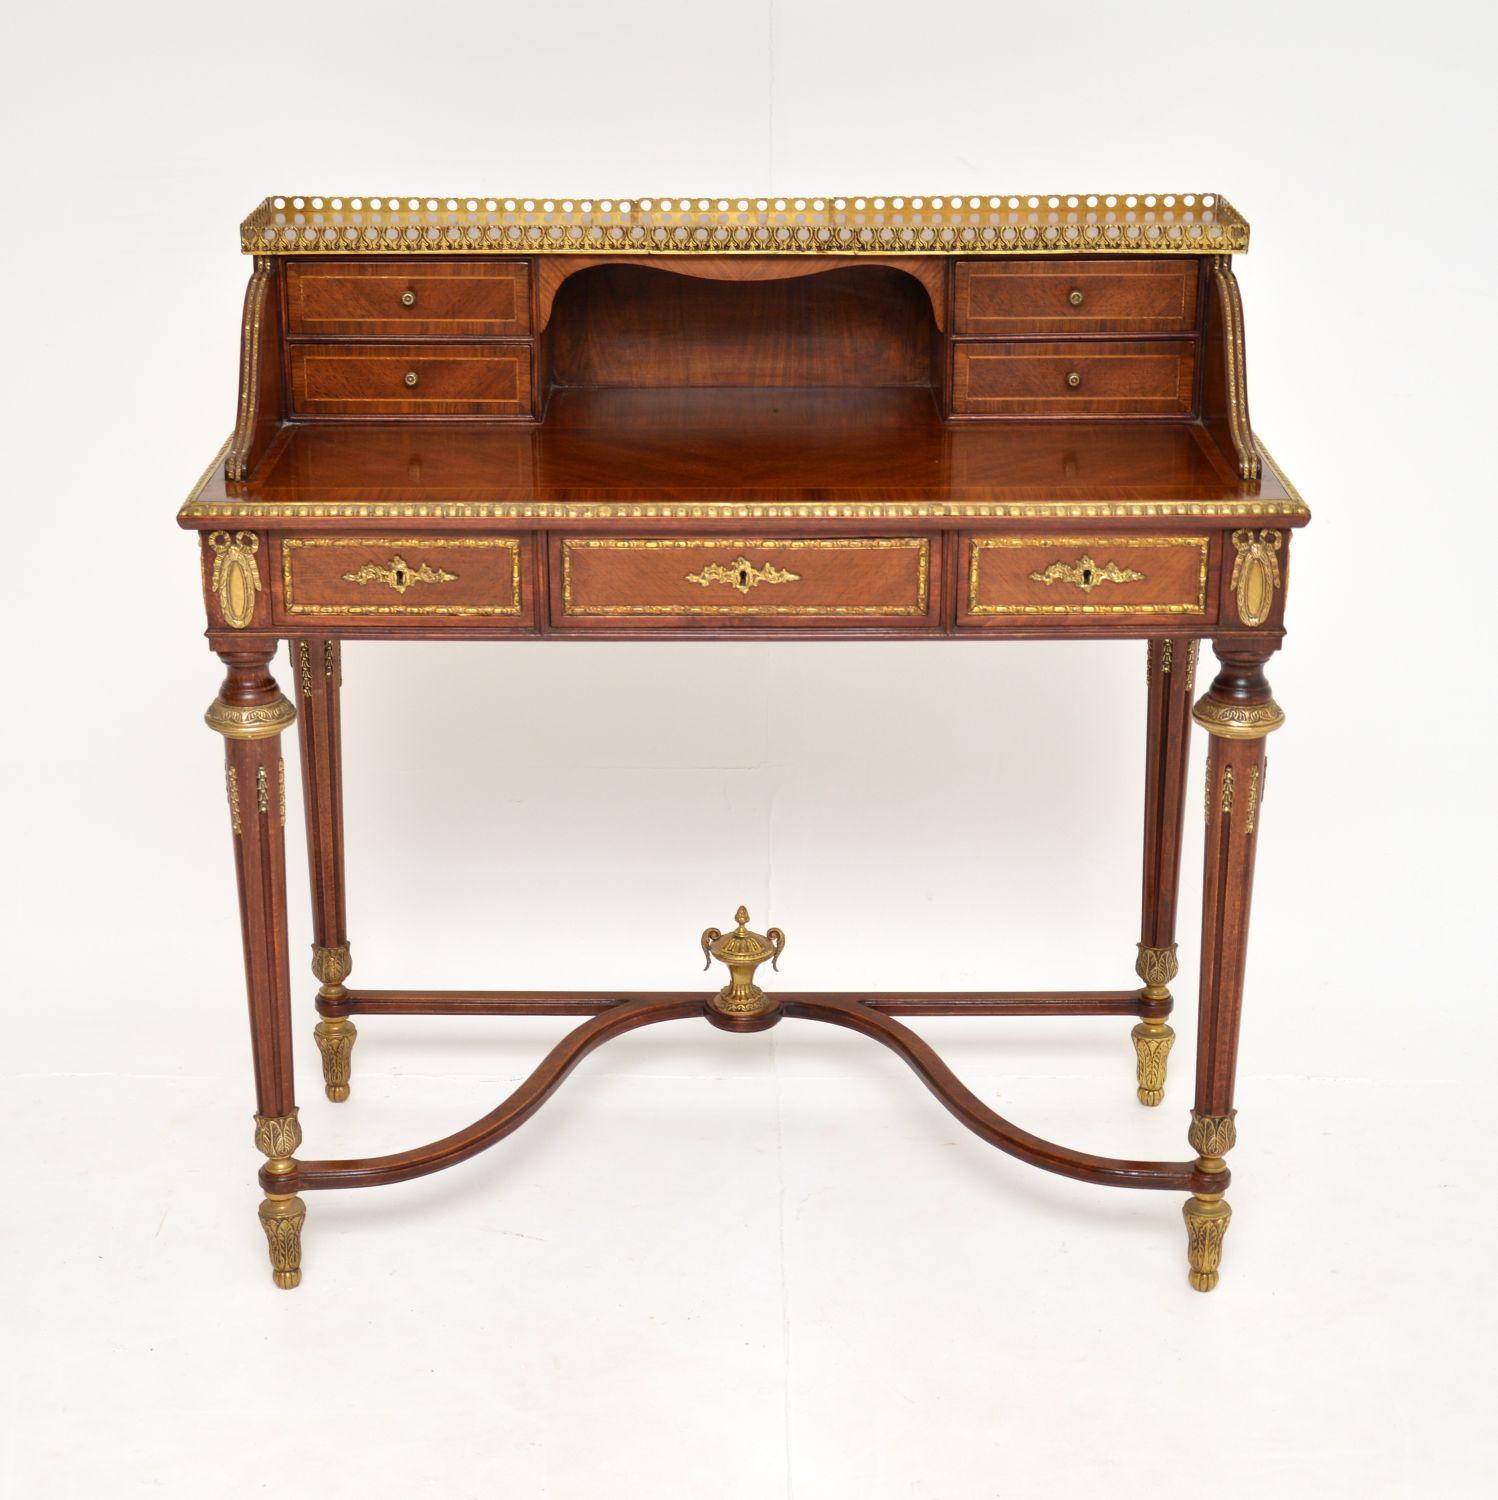 An absolutely stunning antique French secretaire desk, dating from around the 1930’s period.

There are amazing gilt bronze features throughout, with a pierced upper gallery, mounts on all edges, drawers and on the base too. The legs are fluted &